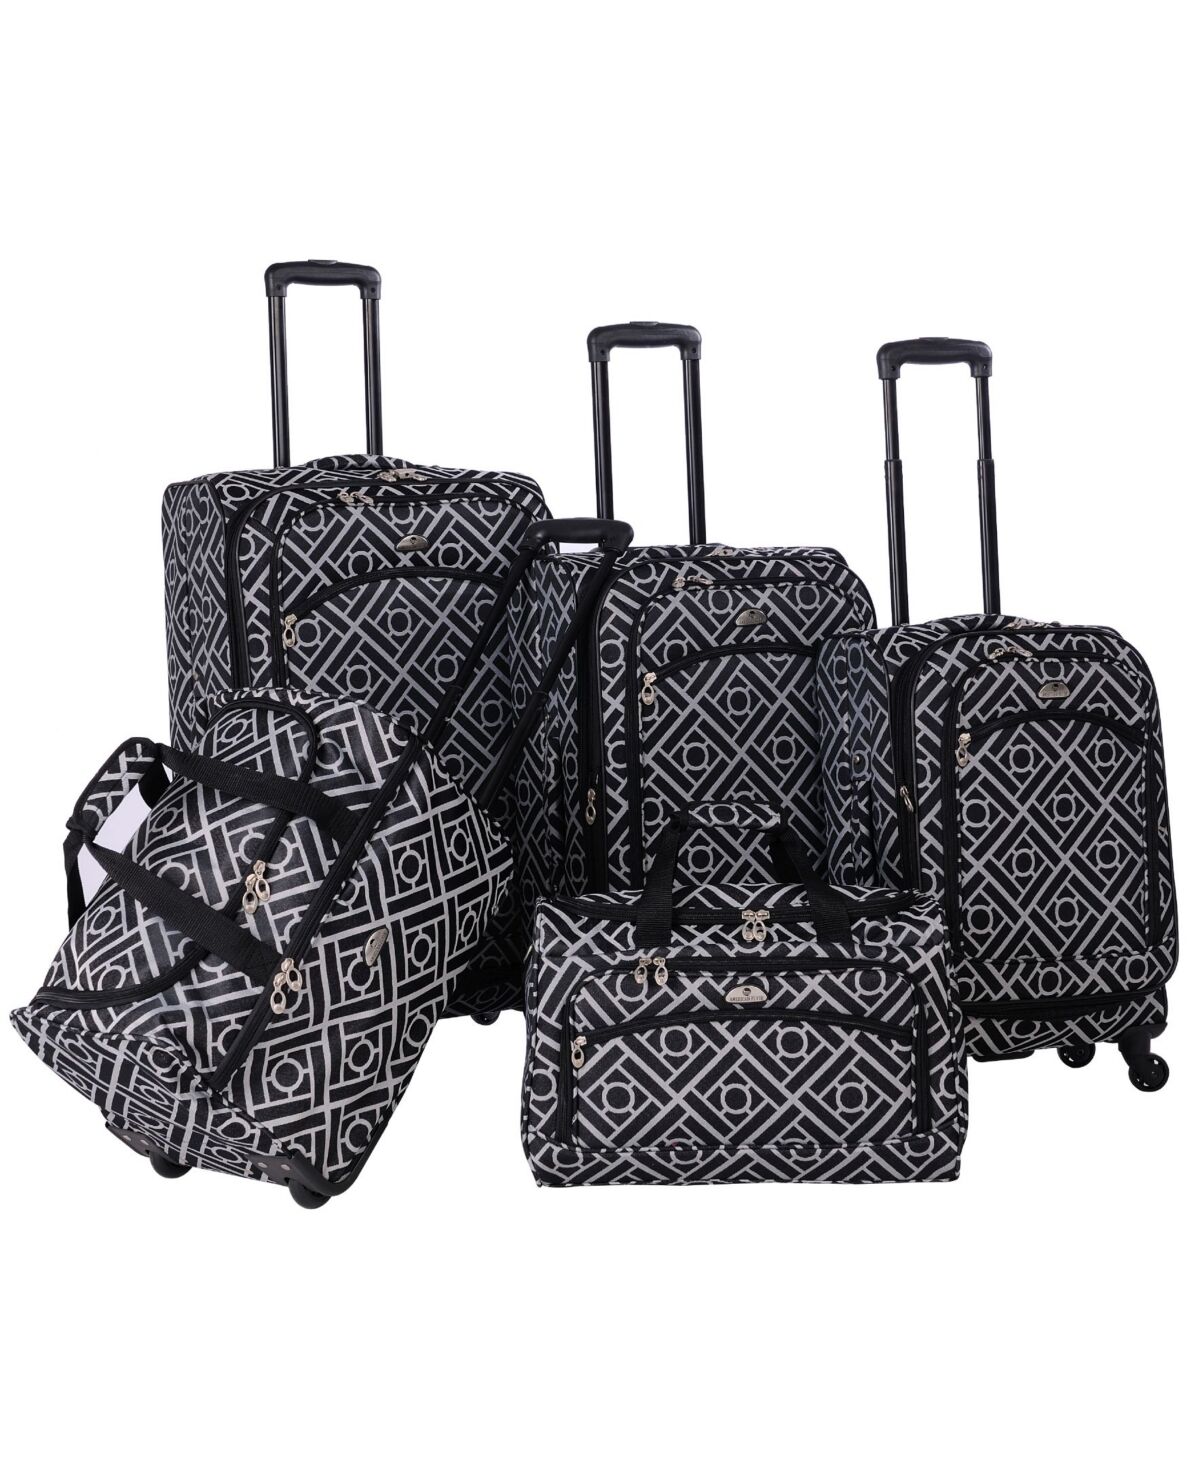 American Flyer Astor Collection 5 Piece Luggage Set - Black